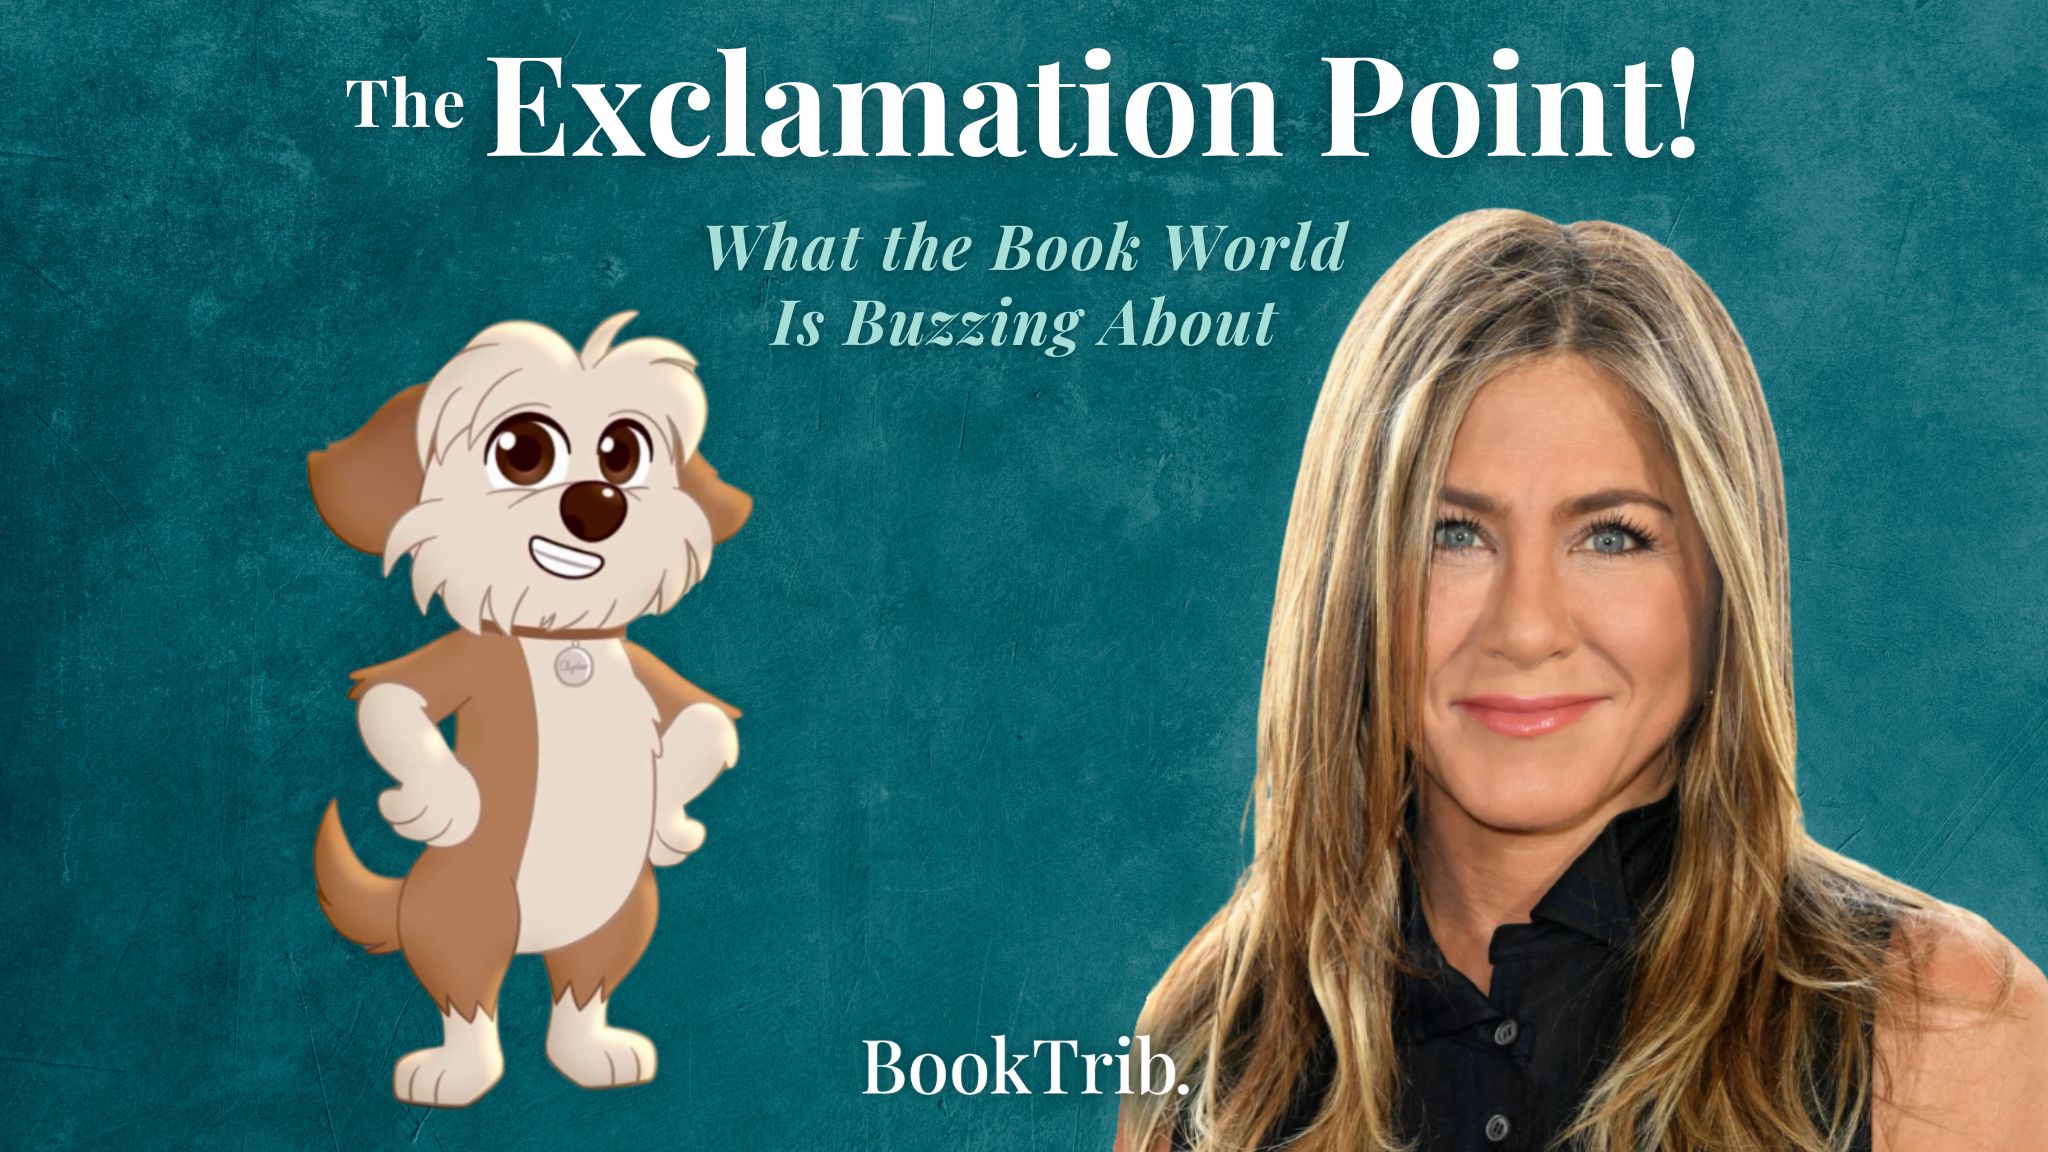 Jennifer Aniston’s new children’s book and preparations for “Sunrise on the Reaping”